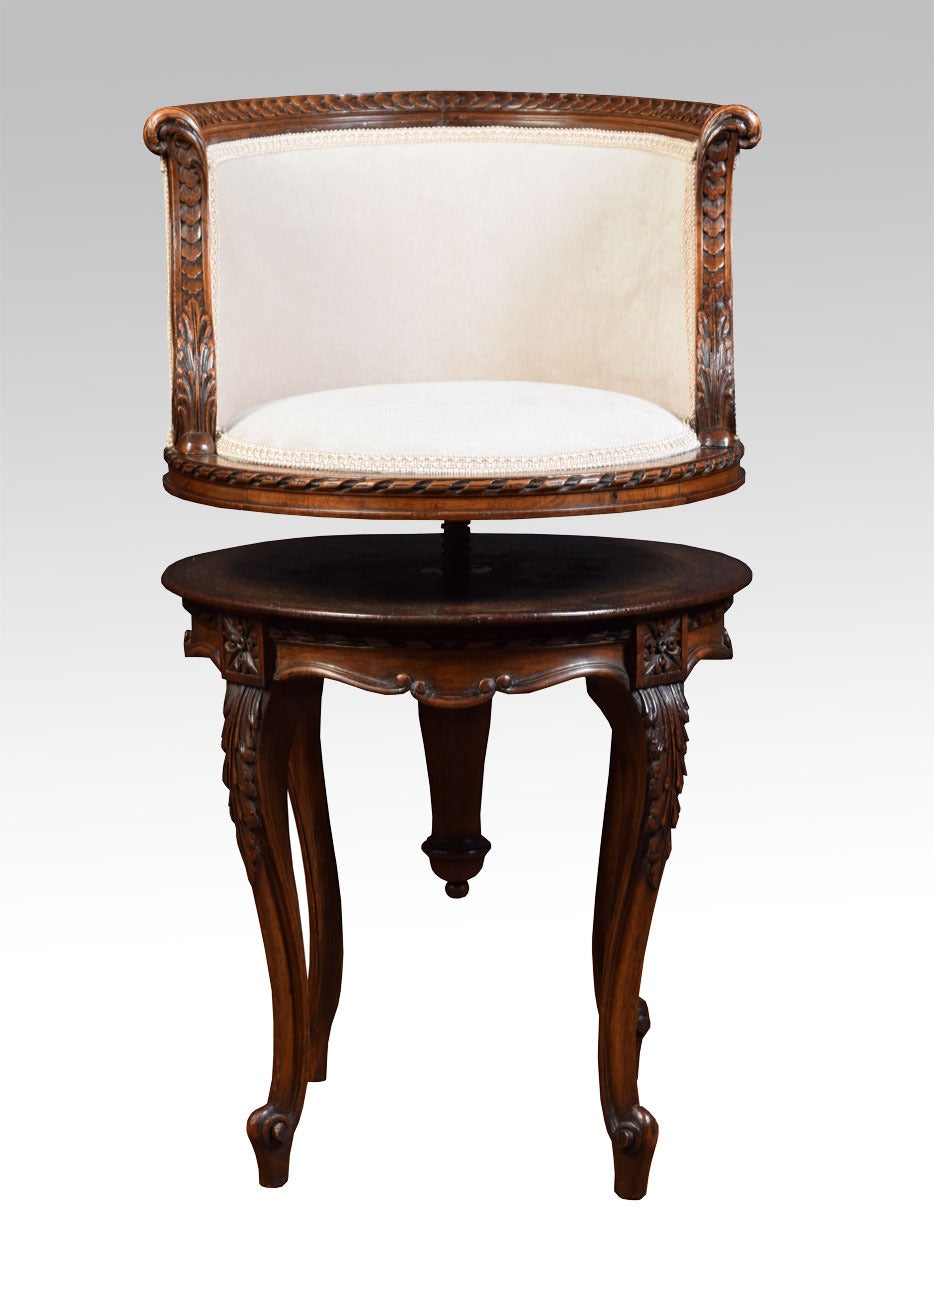 British Late 19th Century Carved and Upholstered Walnut Ladies Dressing Stool